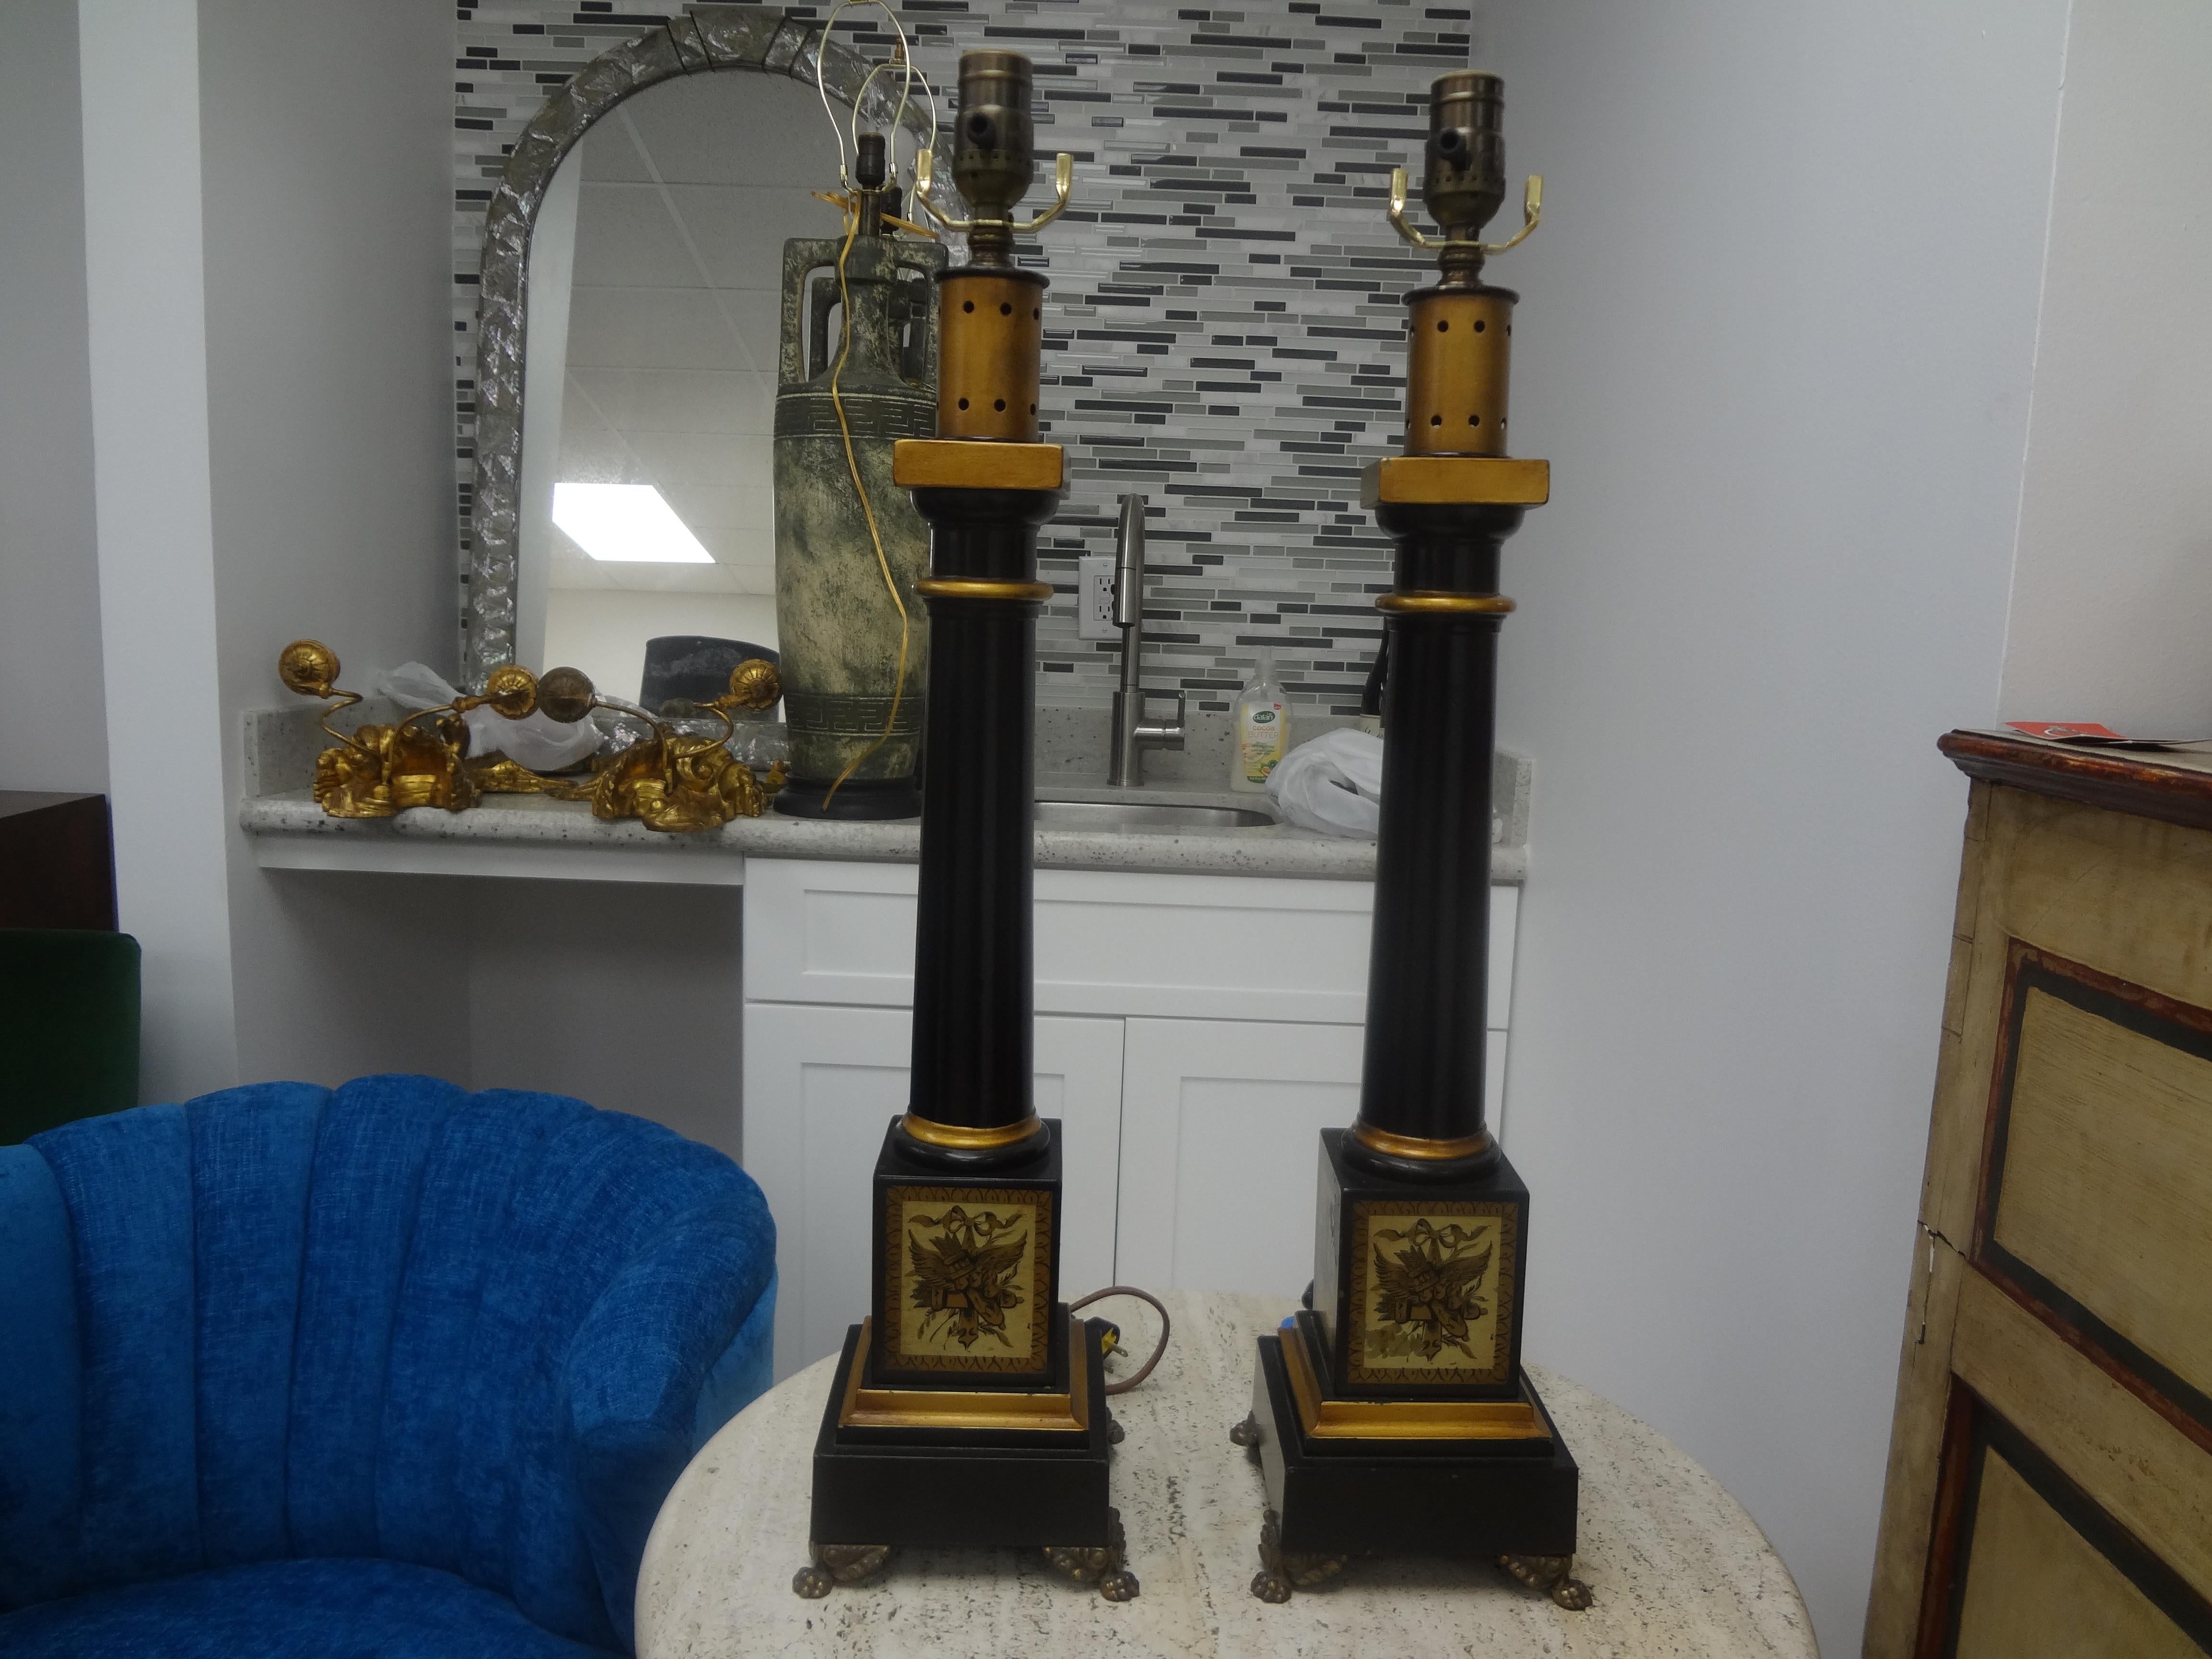 Pair of French neoclassical style tole lamps. This pair of French neoclassical style tole lamps were executed in beautiful black and gold with a stunning neoclassical motif on the bases with bronze paw feet. These lamps have been newly wired with